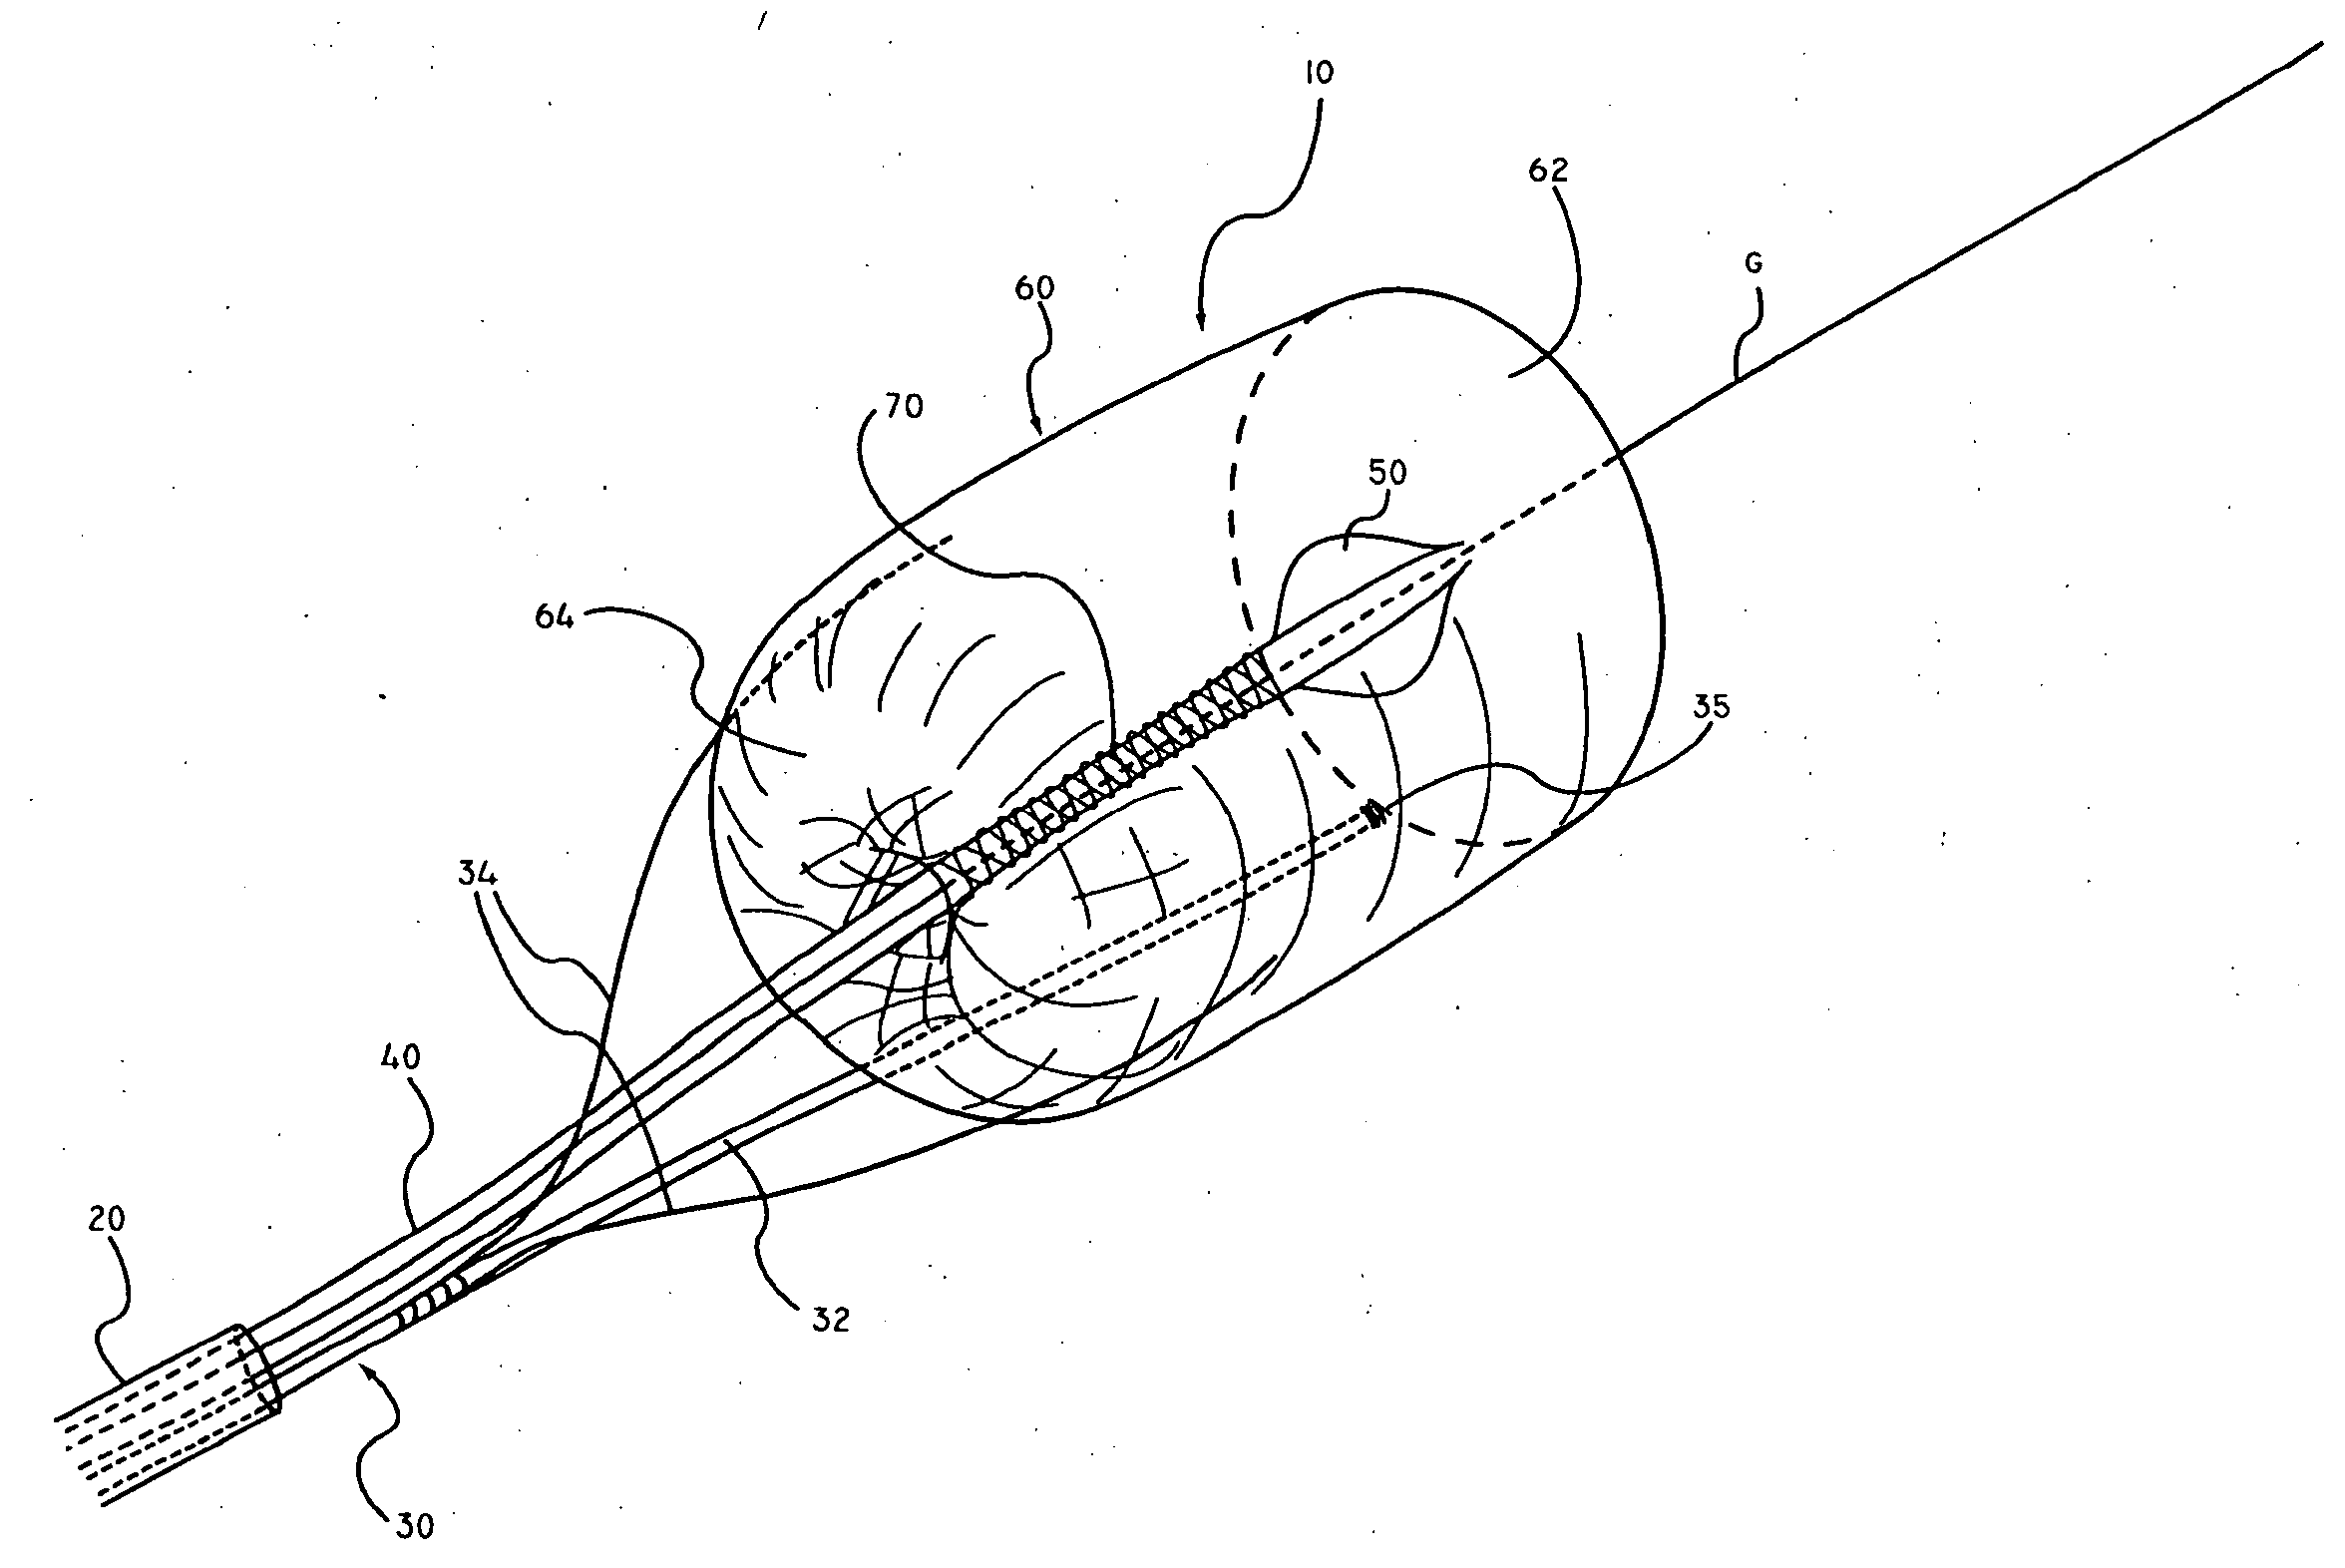 Apparatus and methods for intravascular embolic protection